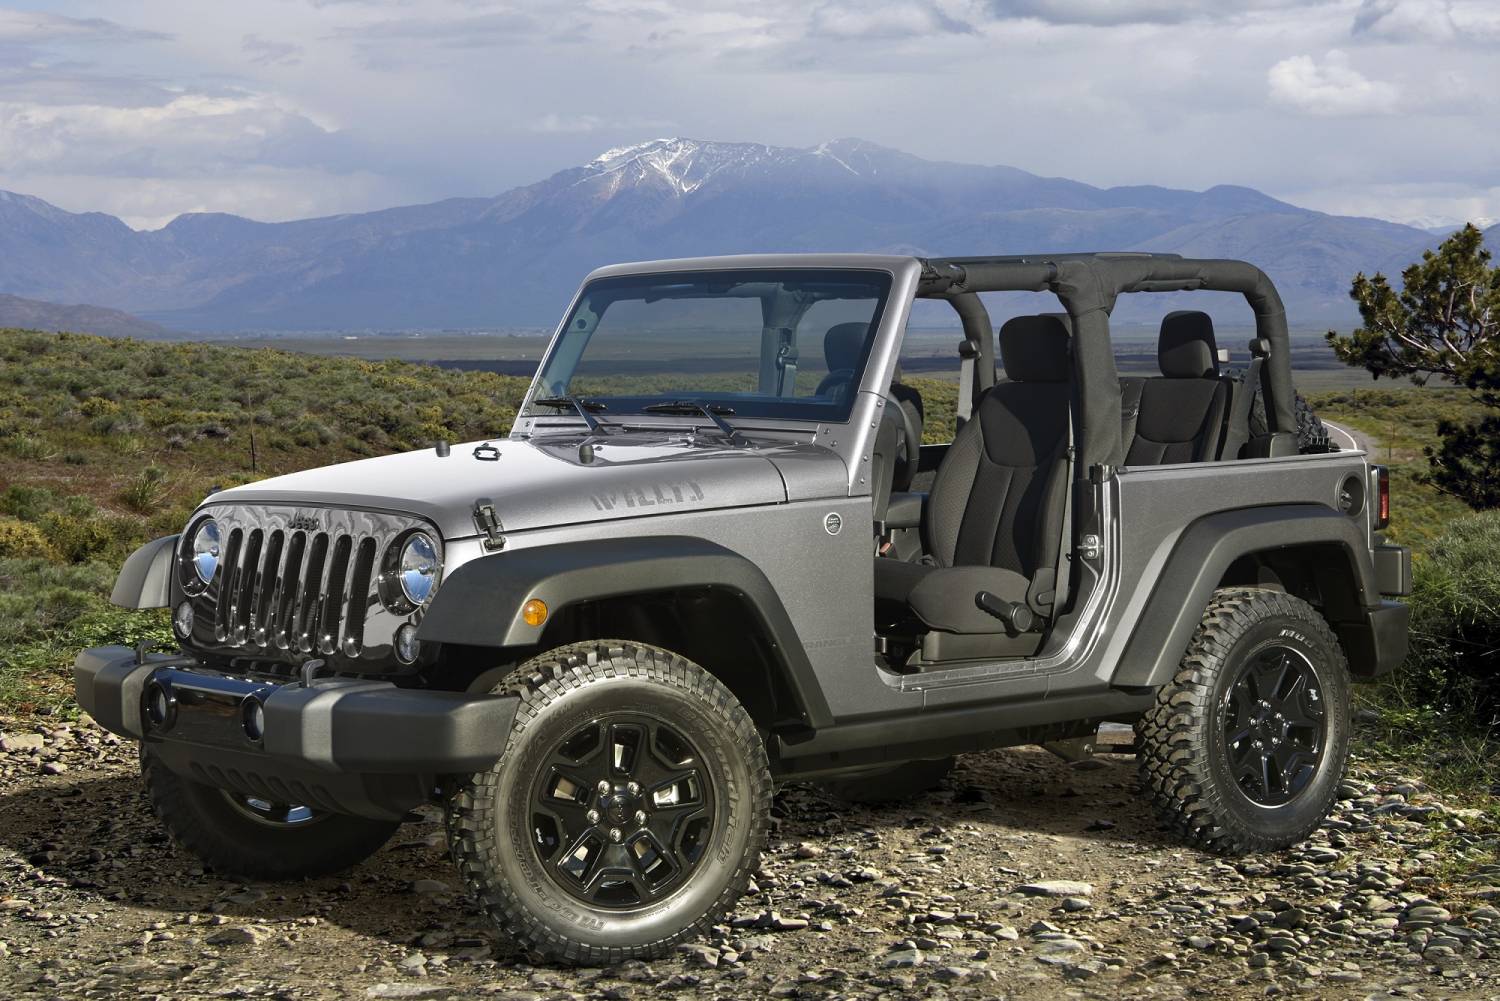 Jeep Willys: Like Using A Hatchet To Peel Taters